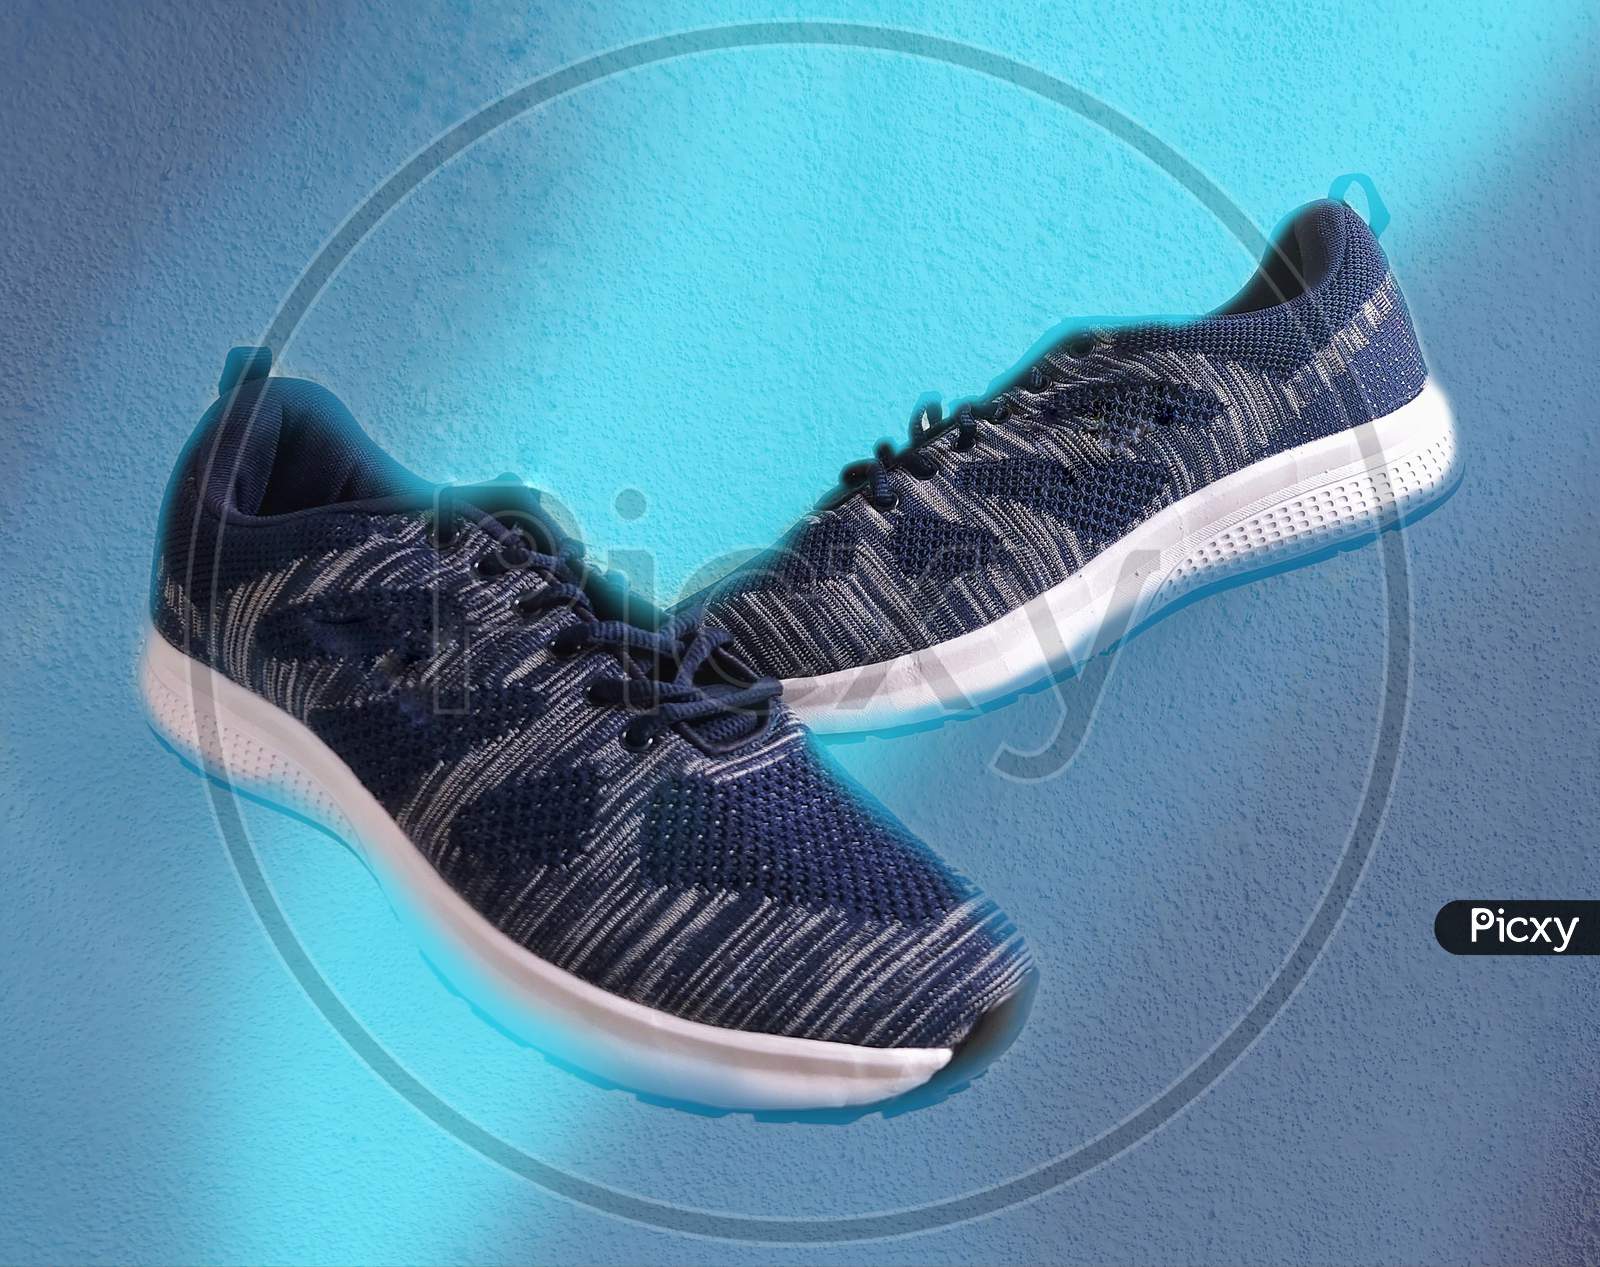 Sport shoes isolated, blue sport shoe